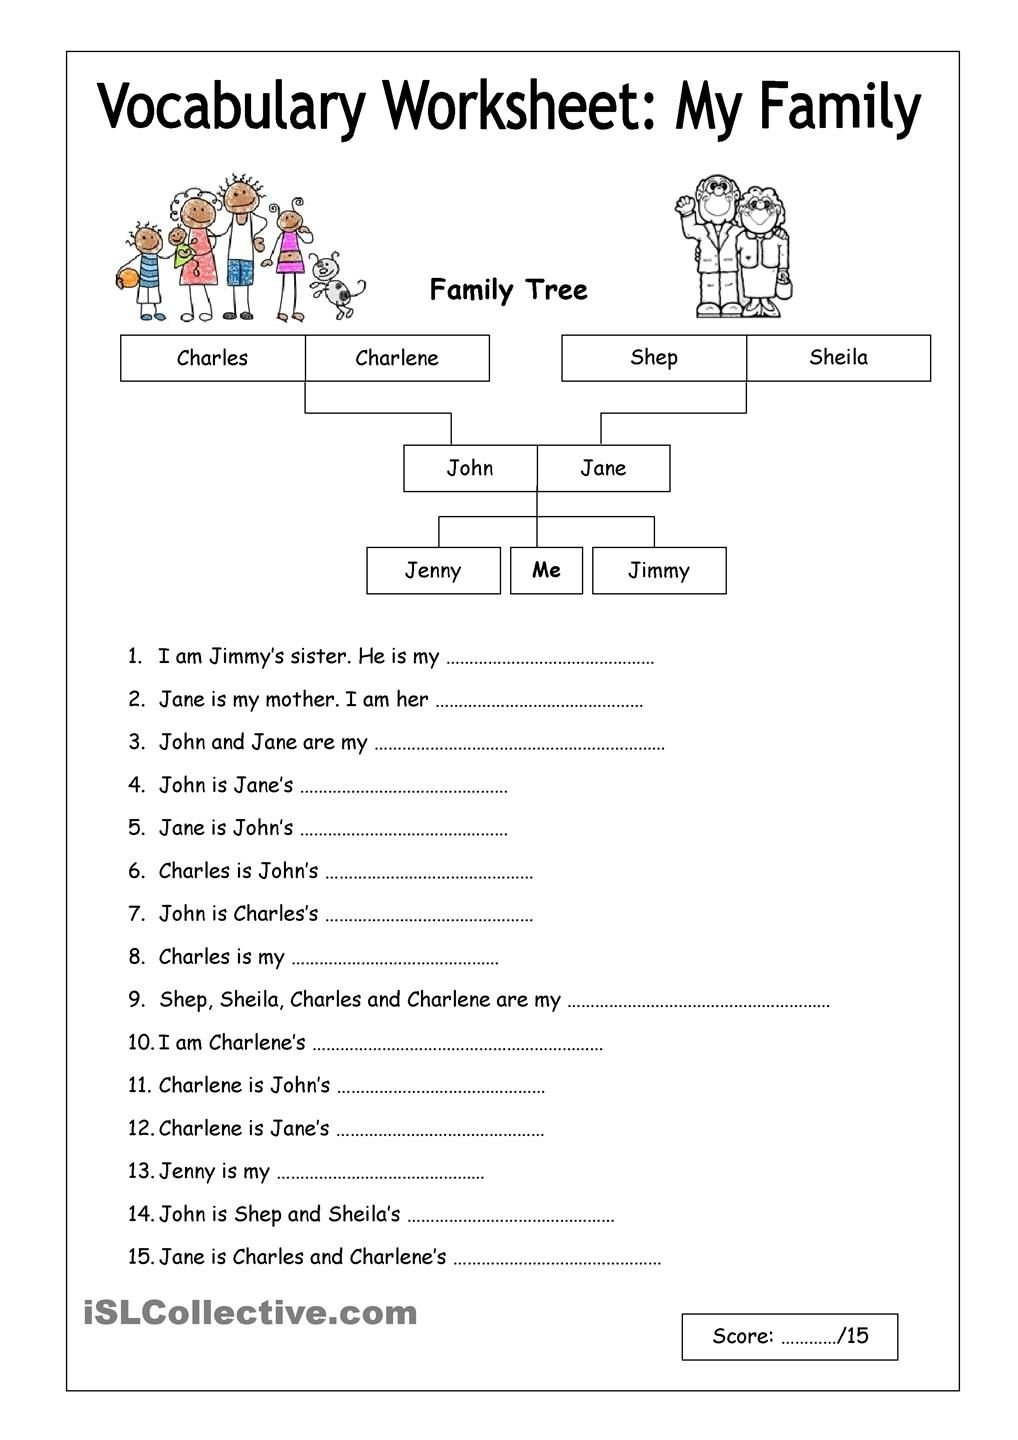 Worksheet Printable Monthly Budget Template Number Writing Practice In Handwriting Worksheets For Adults Pdf